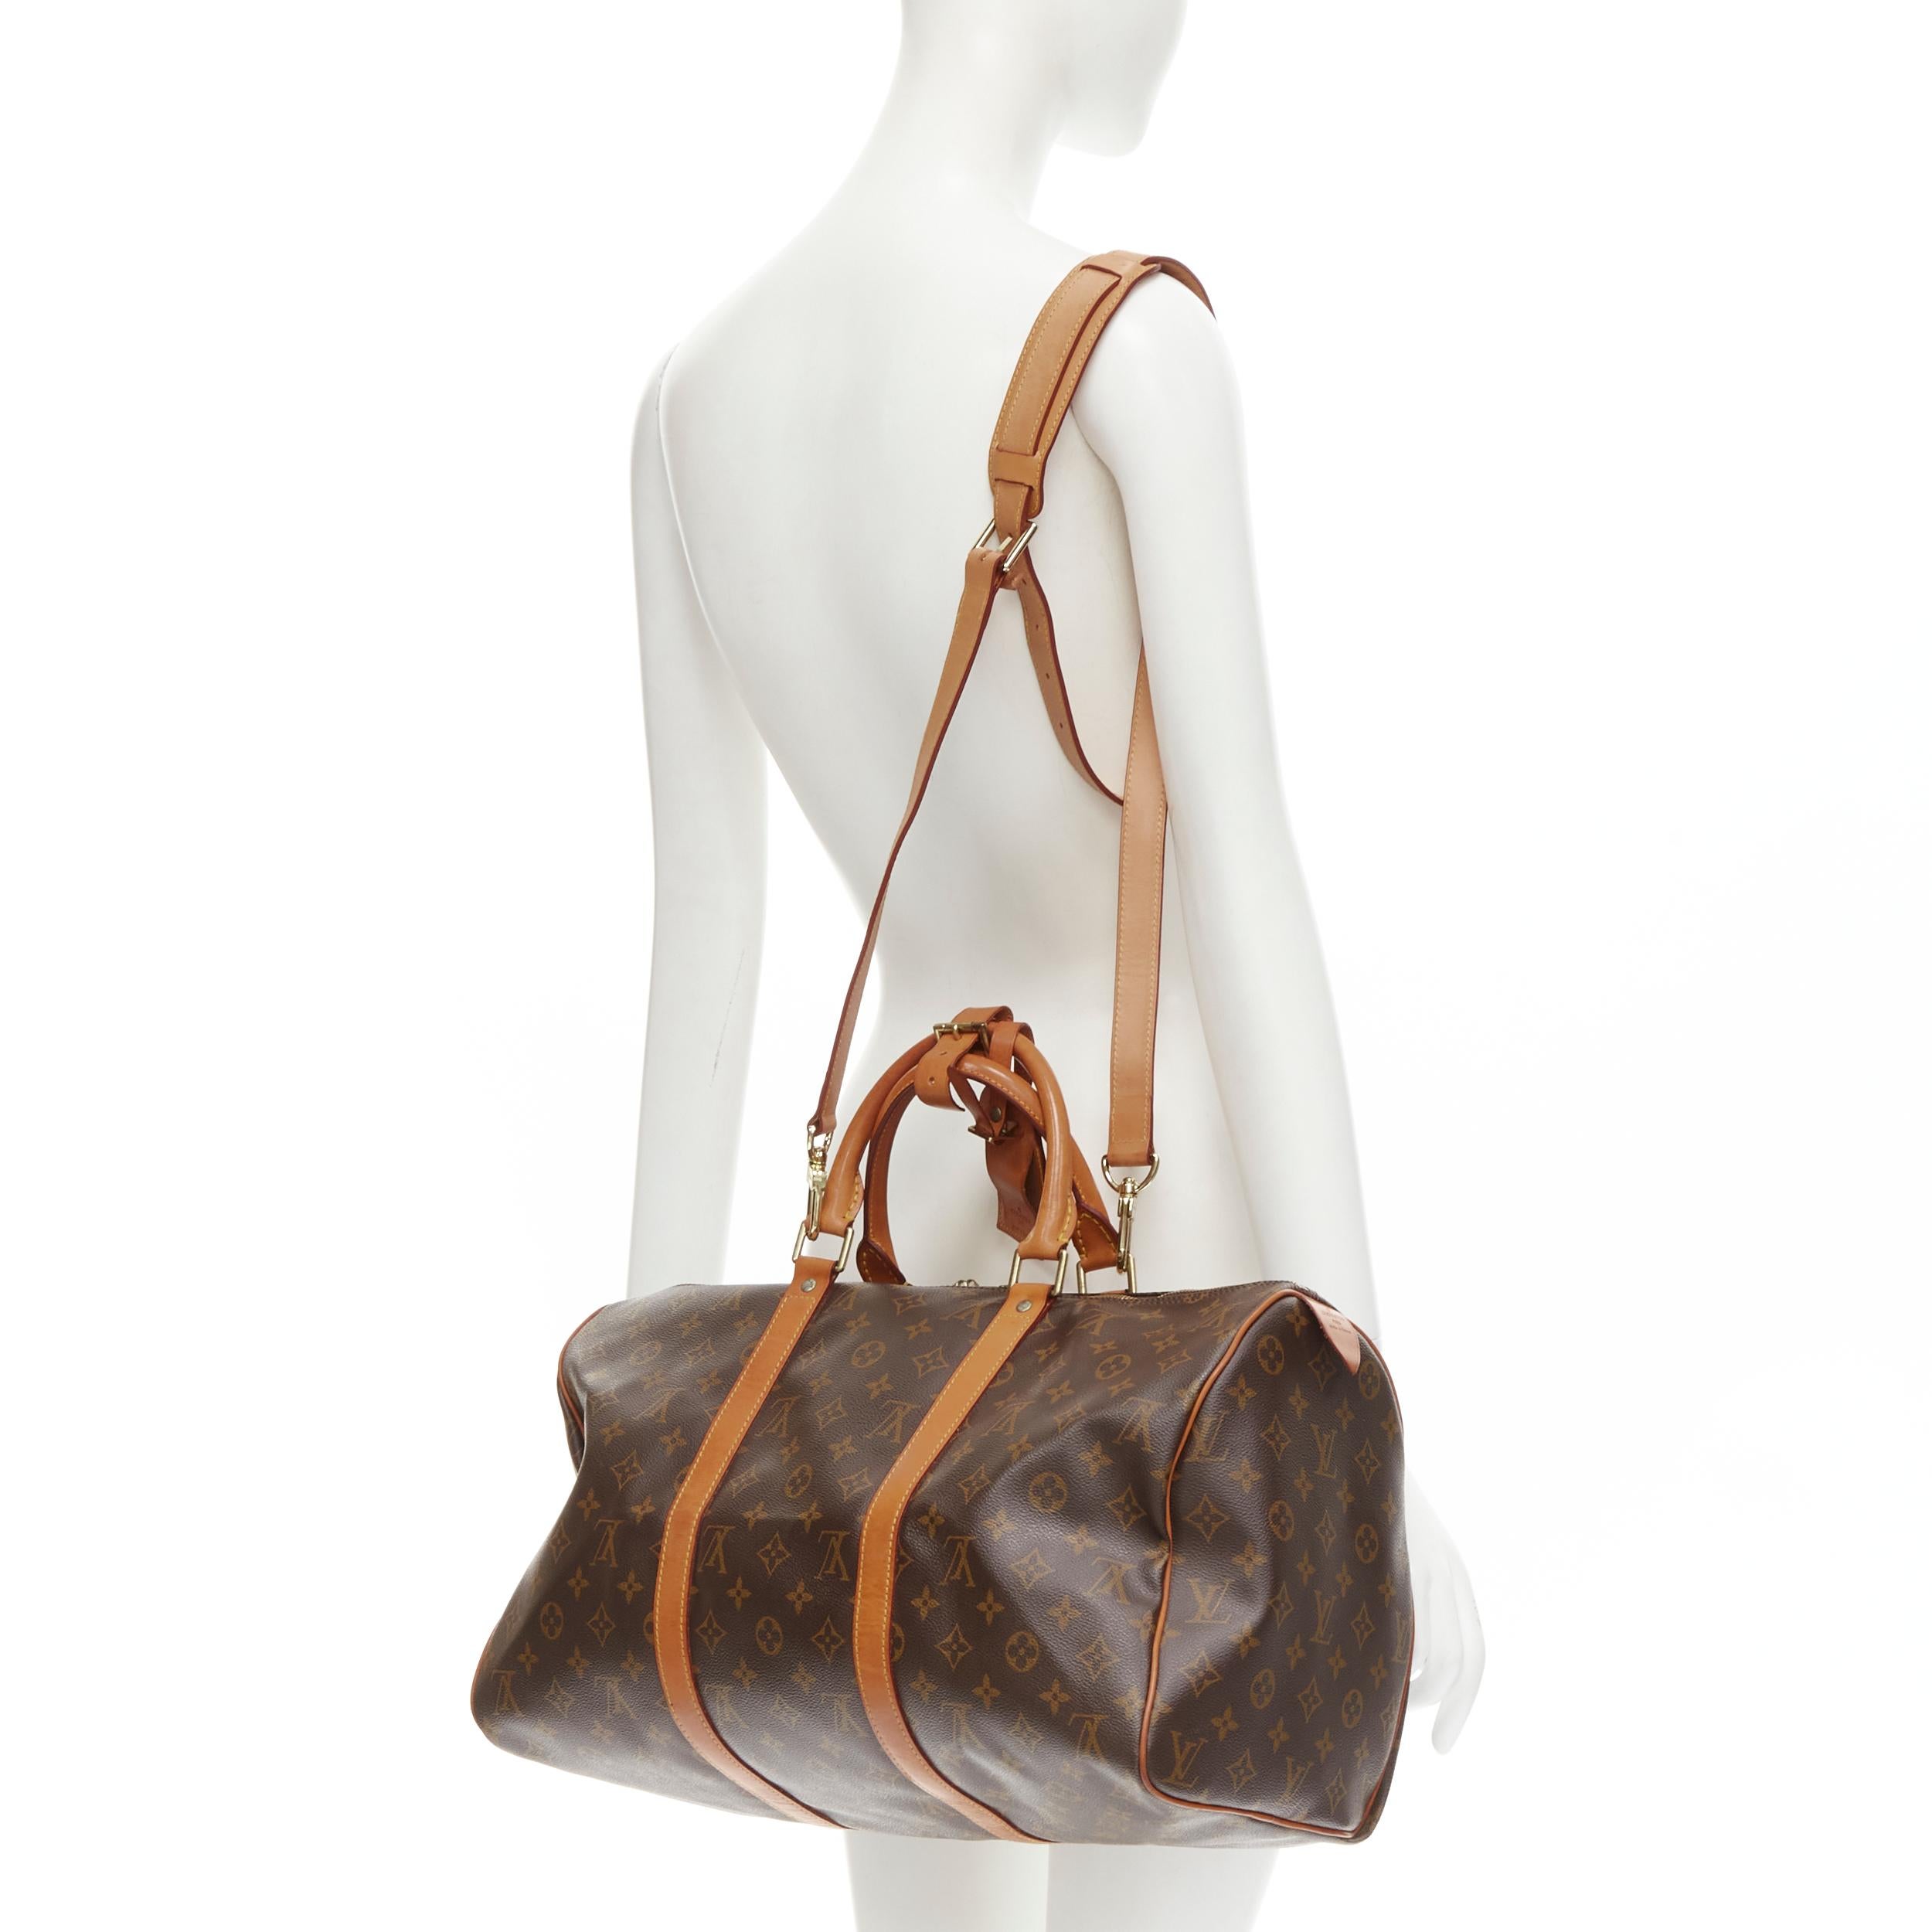 LOUIS VUITTON Vintage Keepall 45 brown monogram canvas leather trim carryall bag 
Reference: AEMA/A00076 
Brand: Louis Vuitton 
Model: Speedy 45 
Material: Canvas 
Color: Brown 
Pattern: Solids 
Closure: Zip 
Extra Detail: Speedy 45cm travel bag.